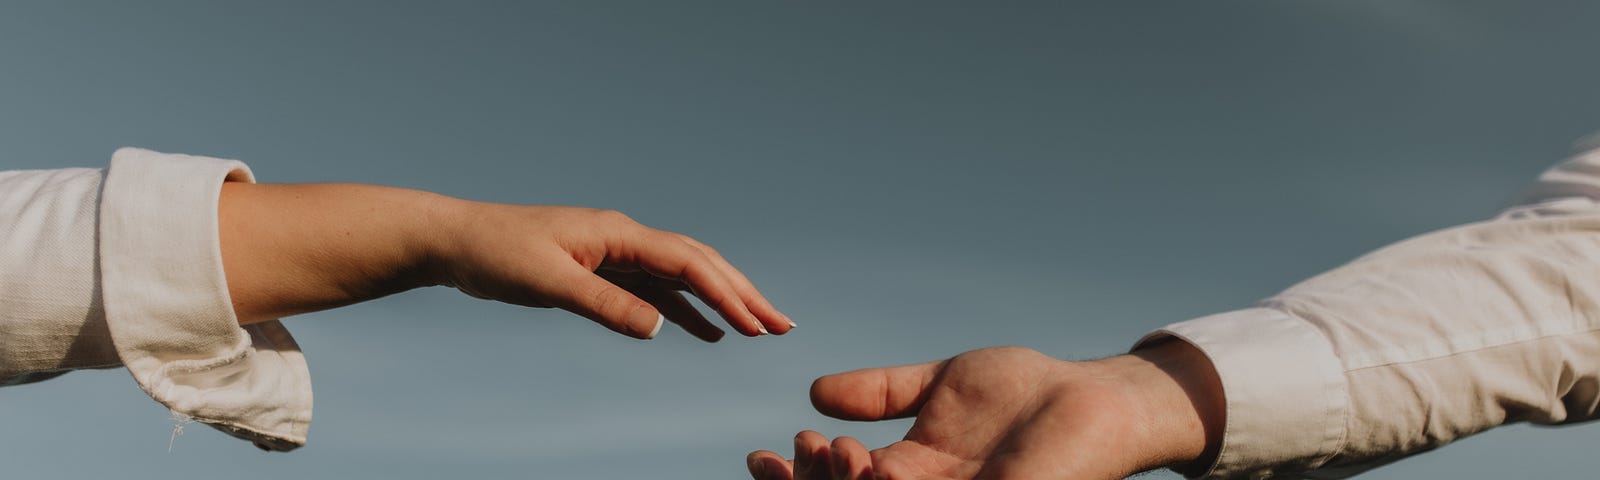 A hand reaching from the left toward an outstretched hand on the right